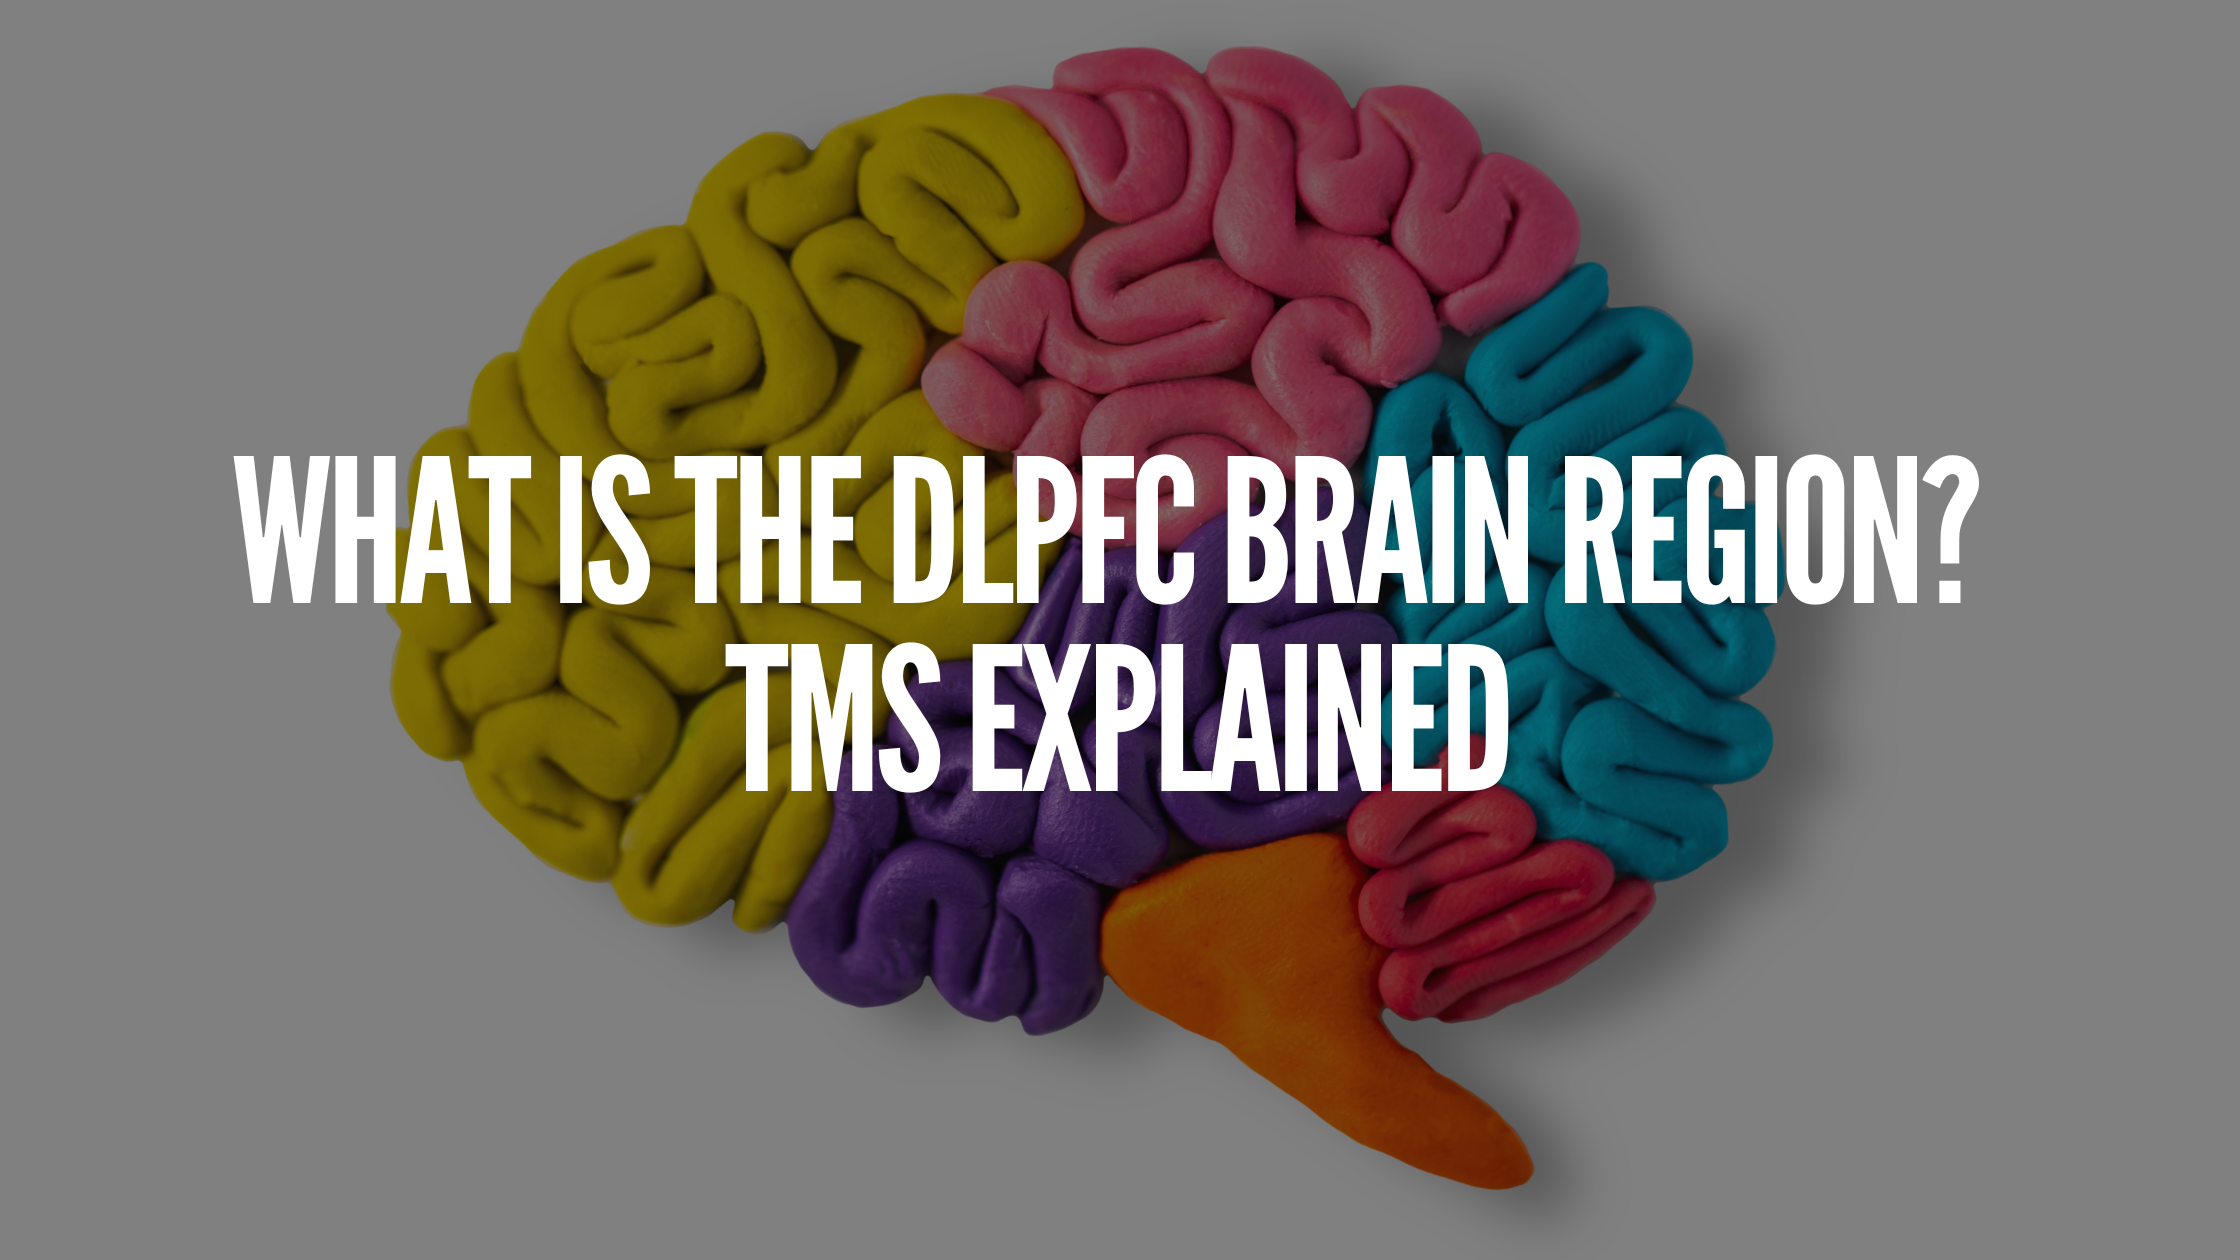 You are currently viewing What is The DLPFC Brain Region? TMS Explained